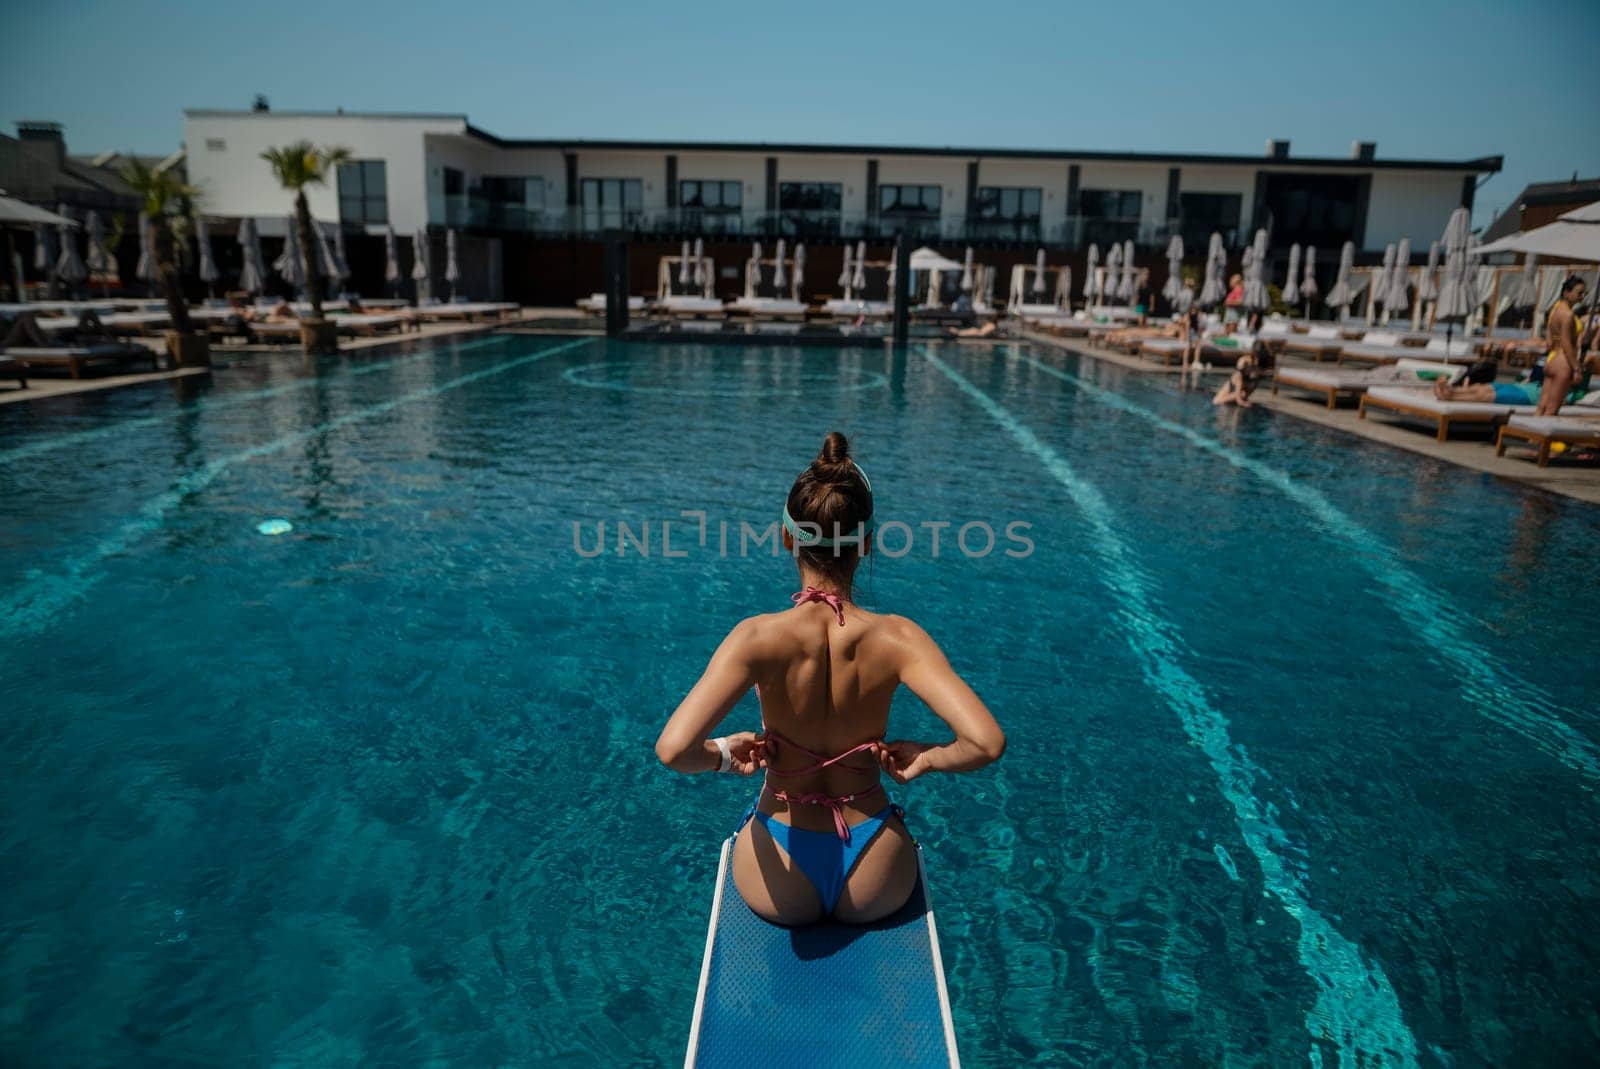 A vibrant lady, dressed in a blue bikini, stands before the pool's cerulean waters. High quality photo